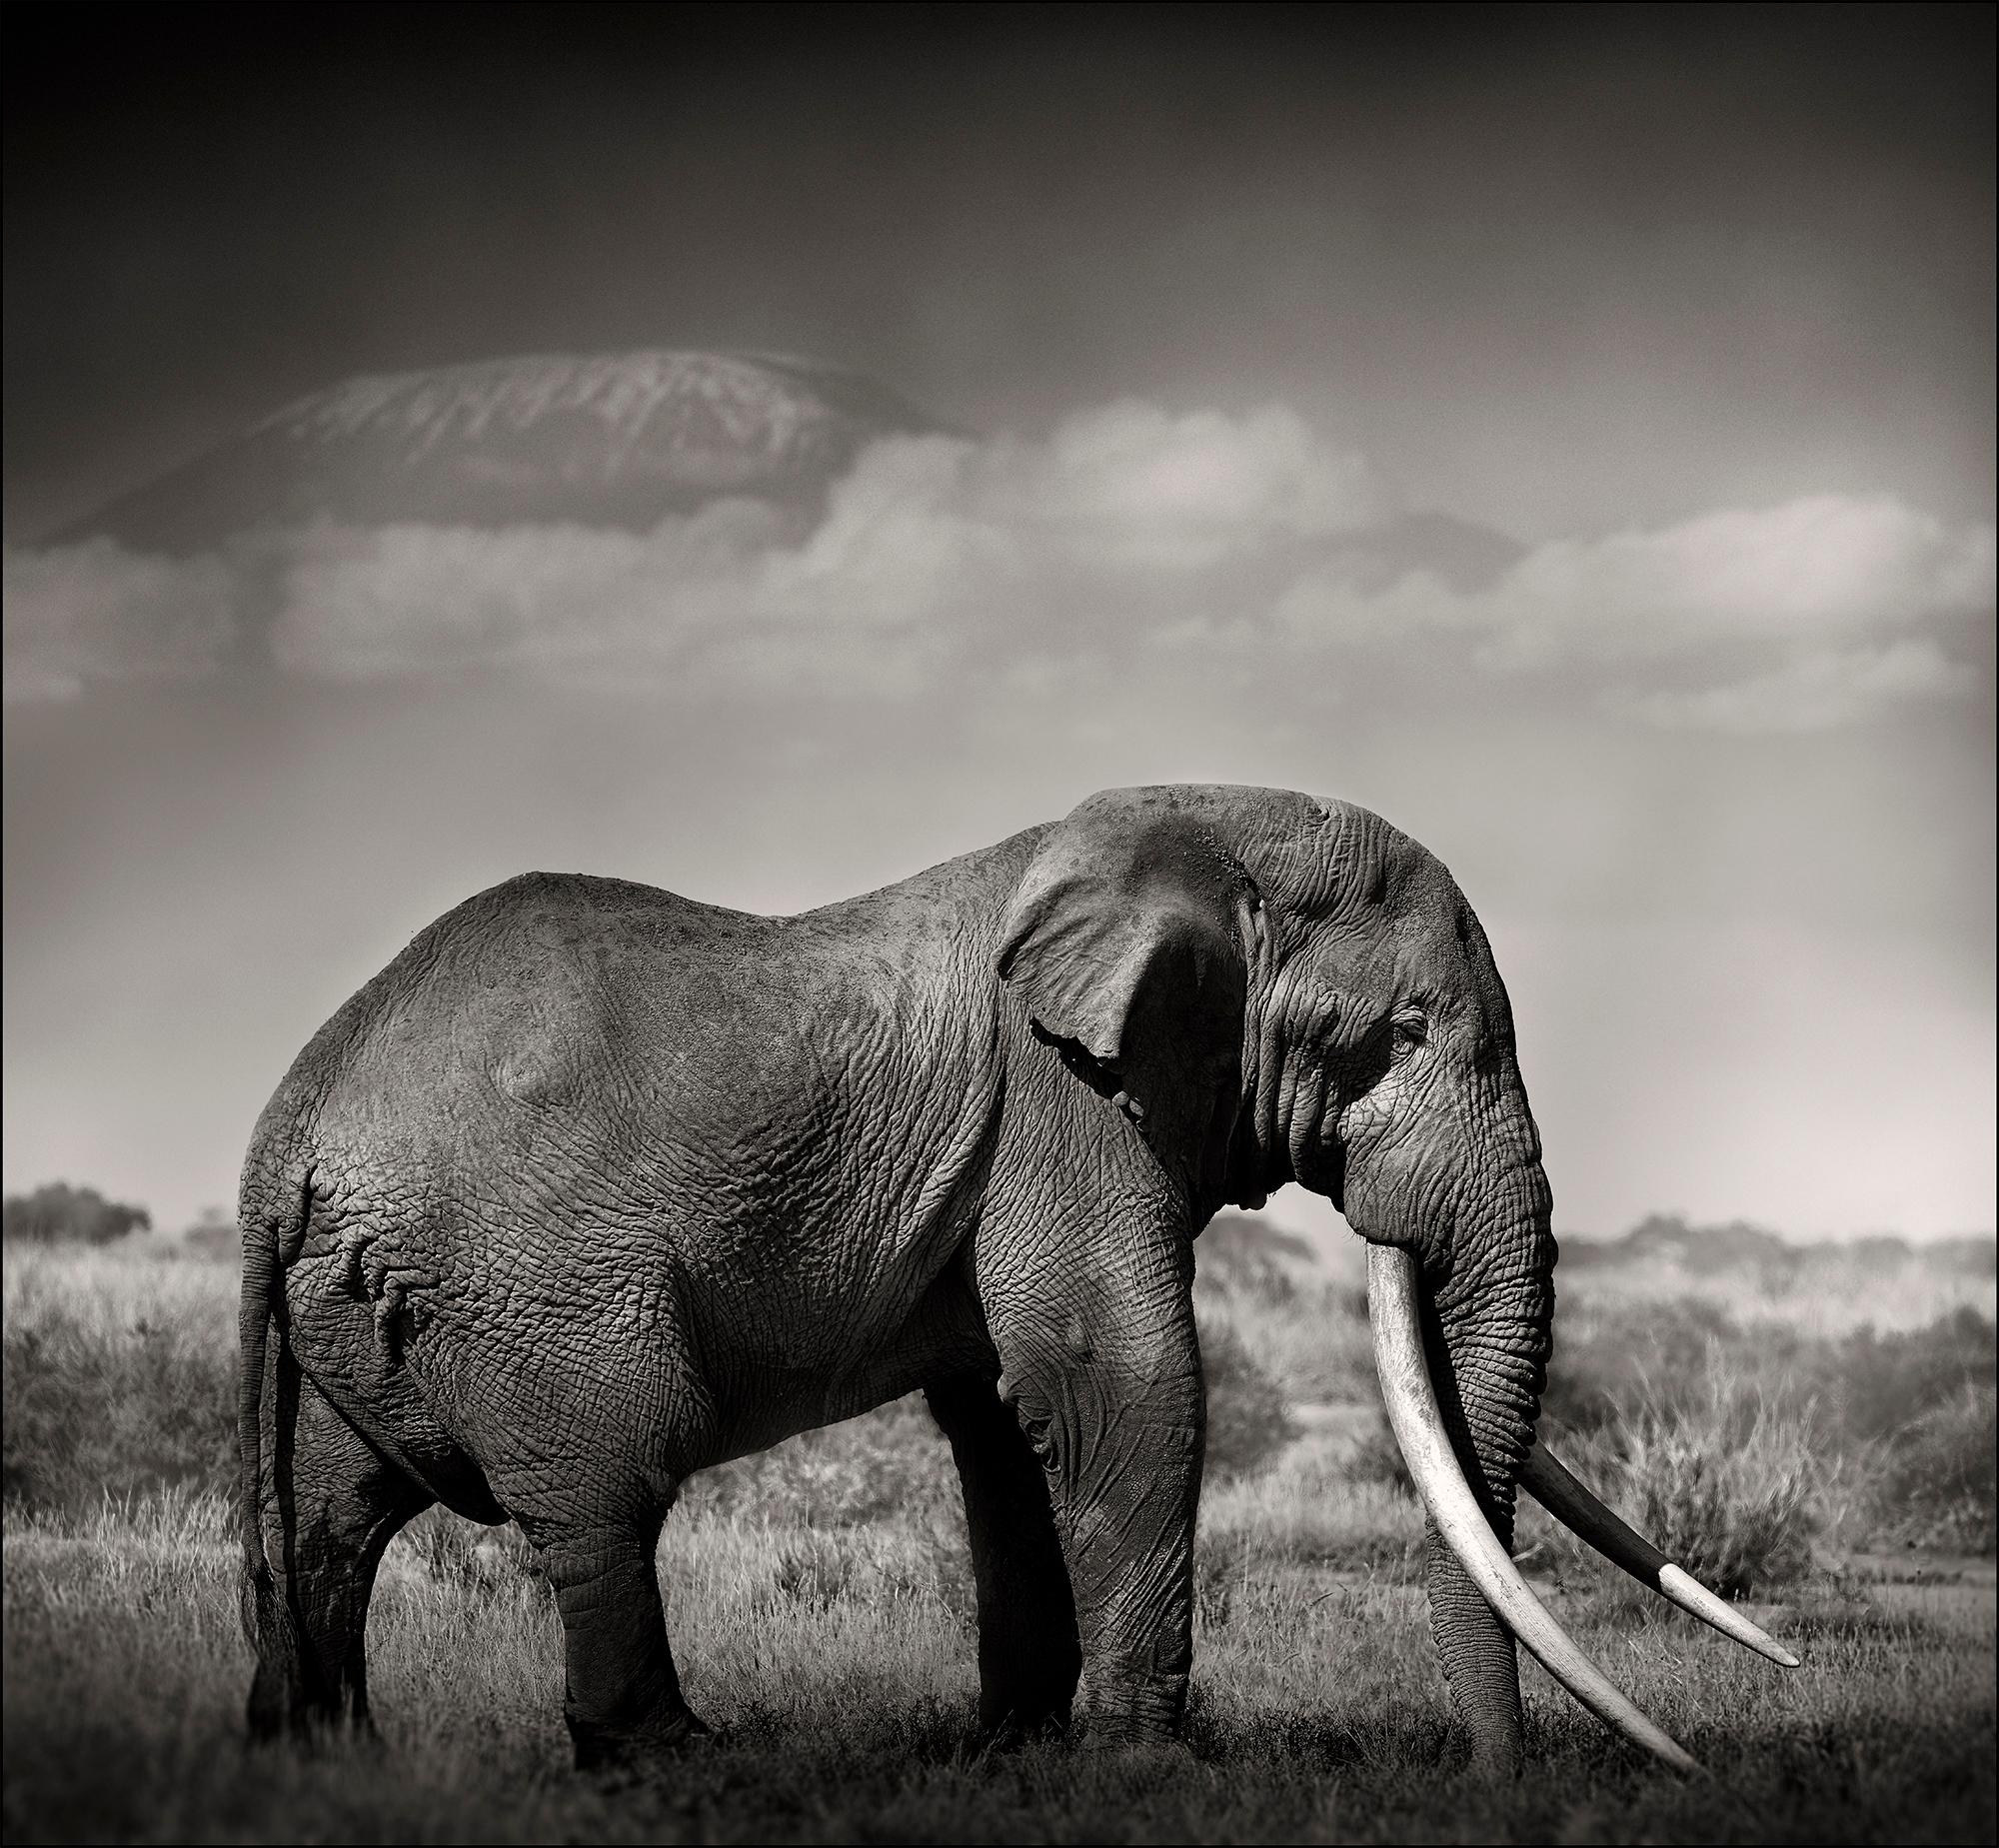 Tim's Land, a Tribute to the icons of Africa, Elephant, wildlife, blackandwhite - Photograph by Joachim Schmeisser